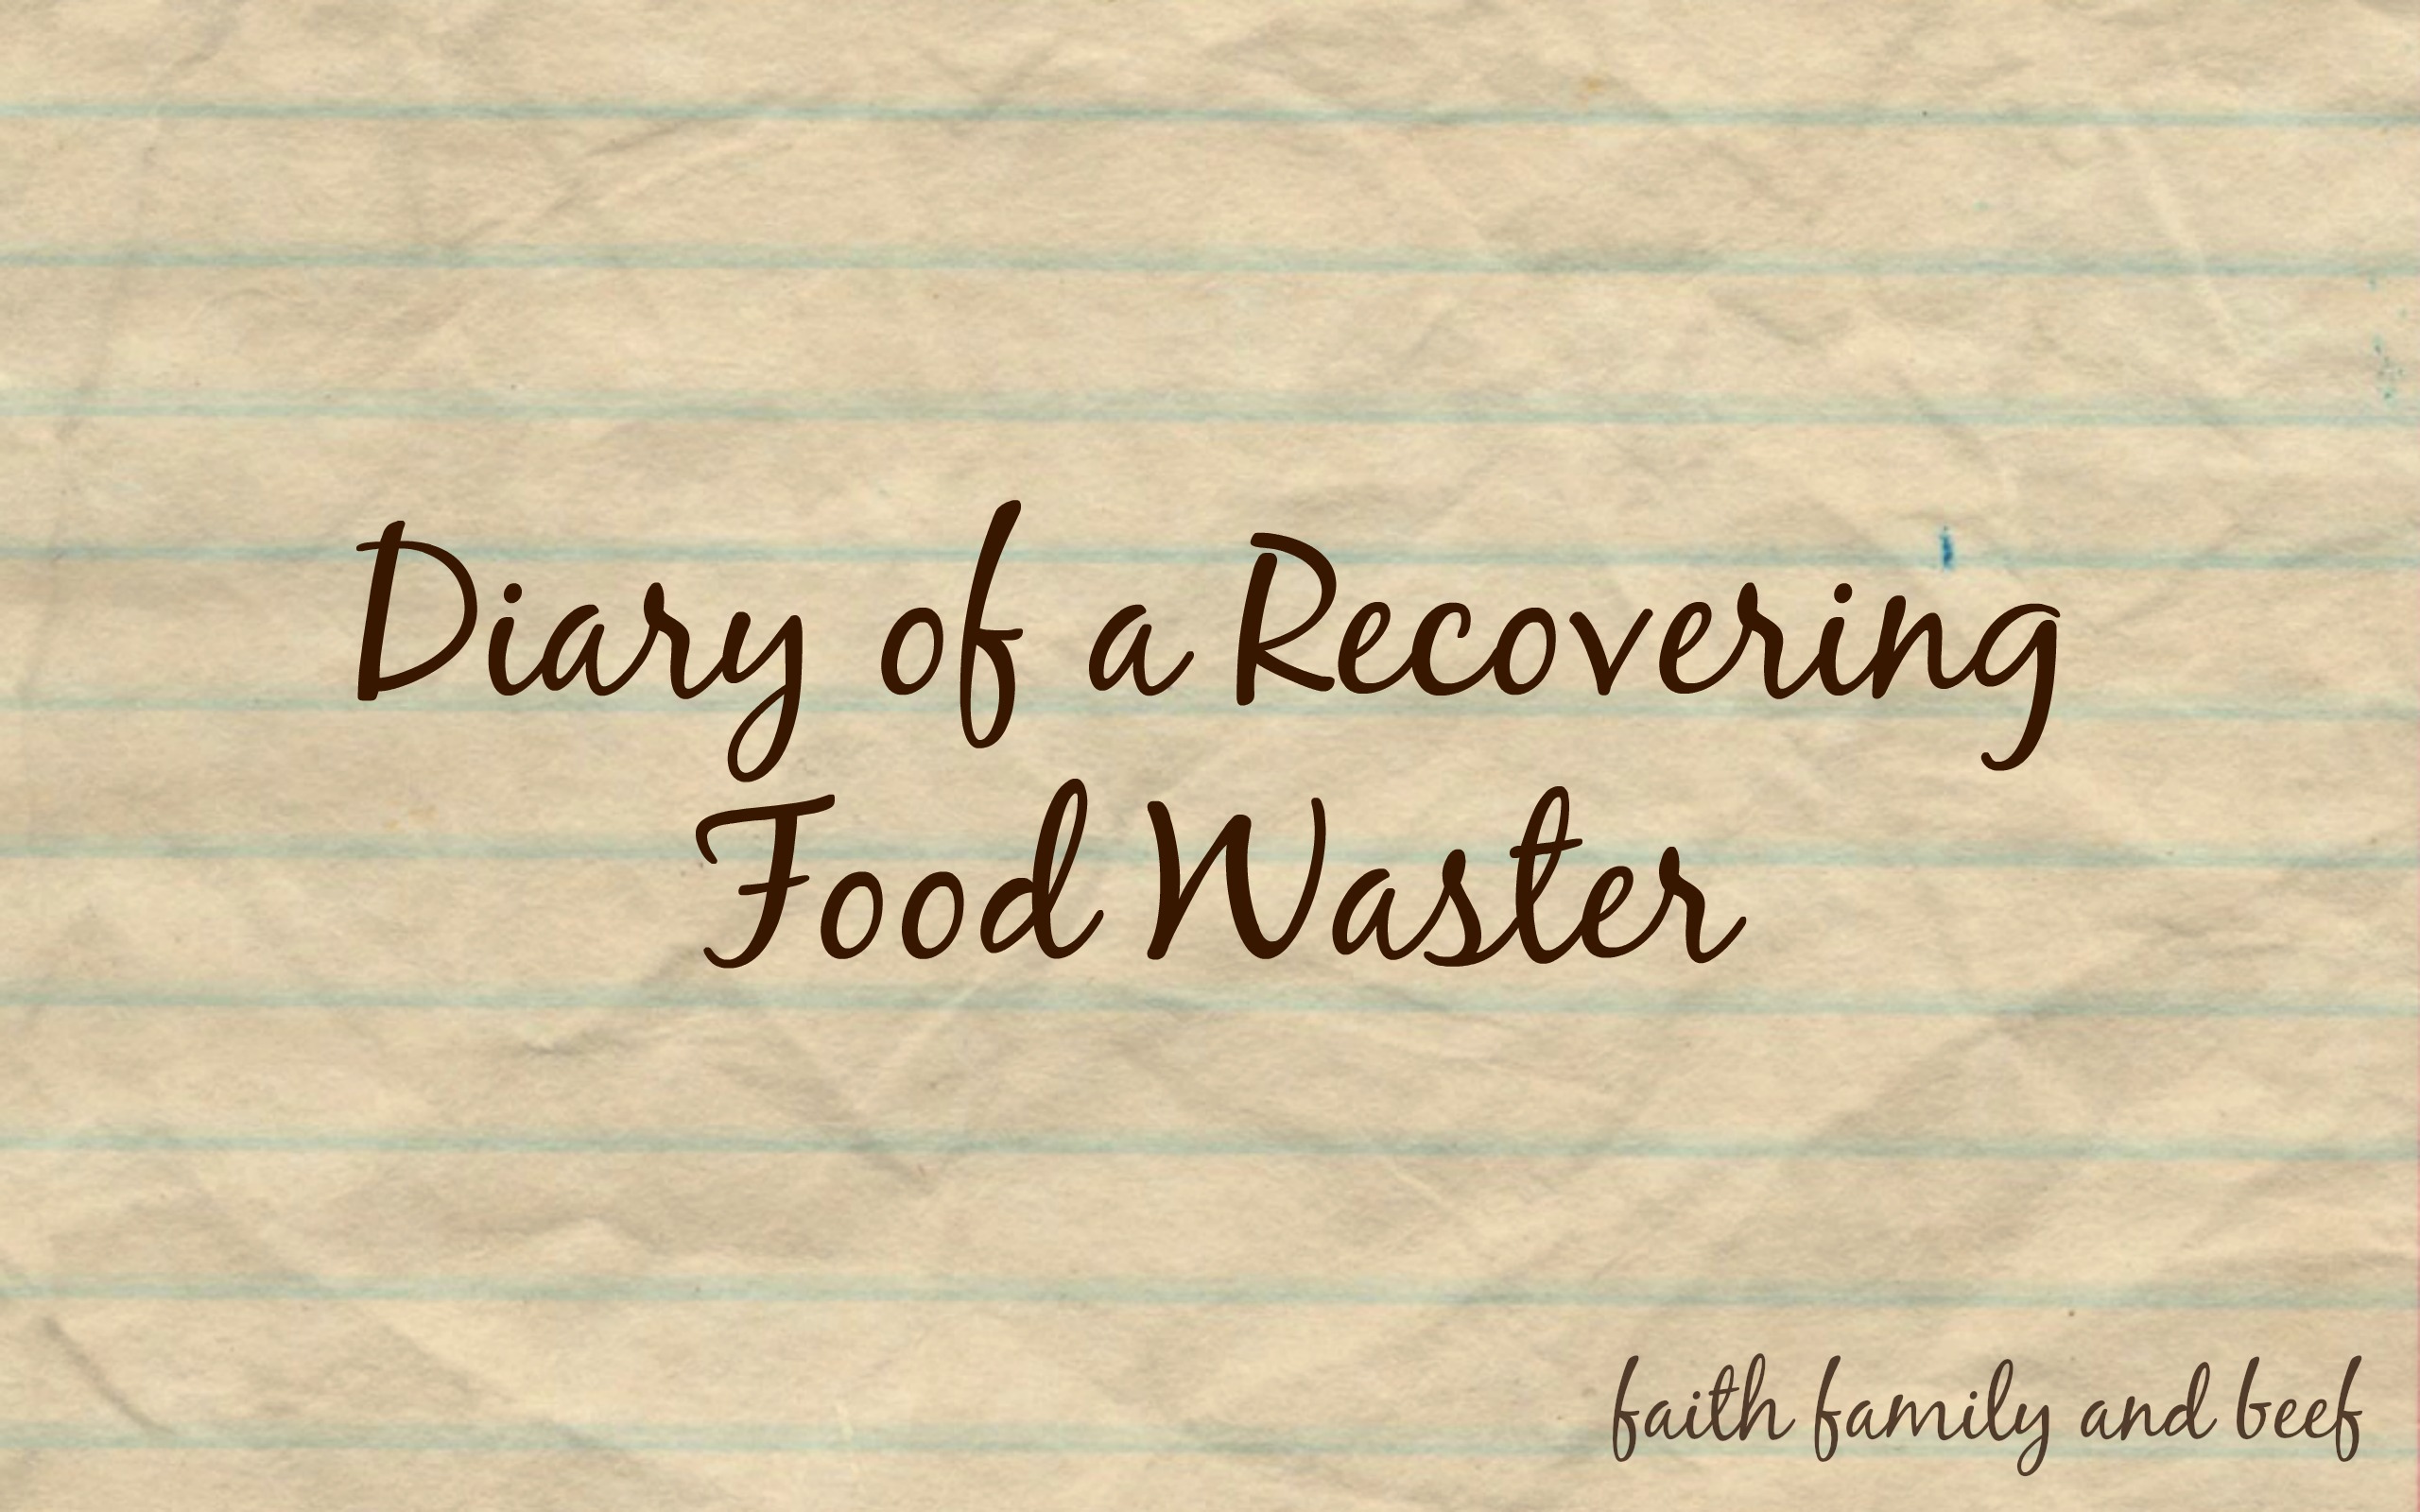 Diary of a Recovering Food Waster – Part 4